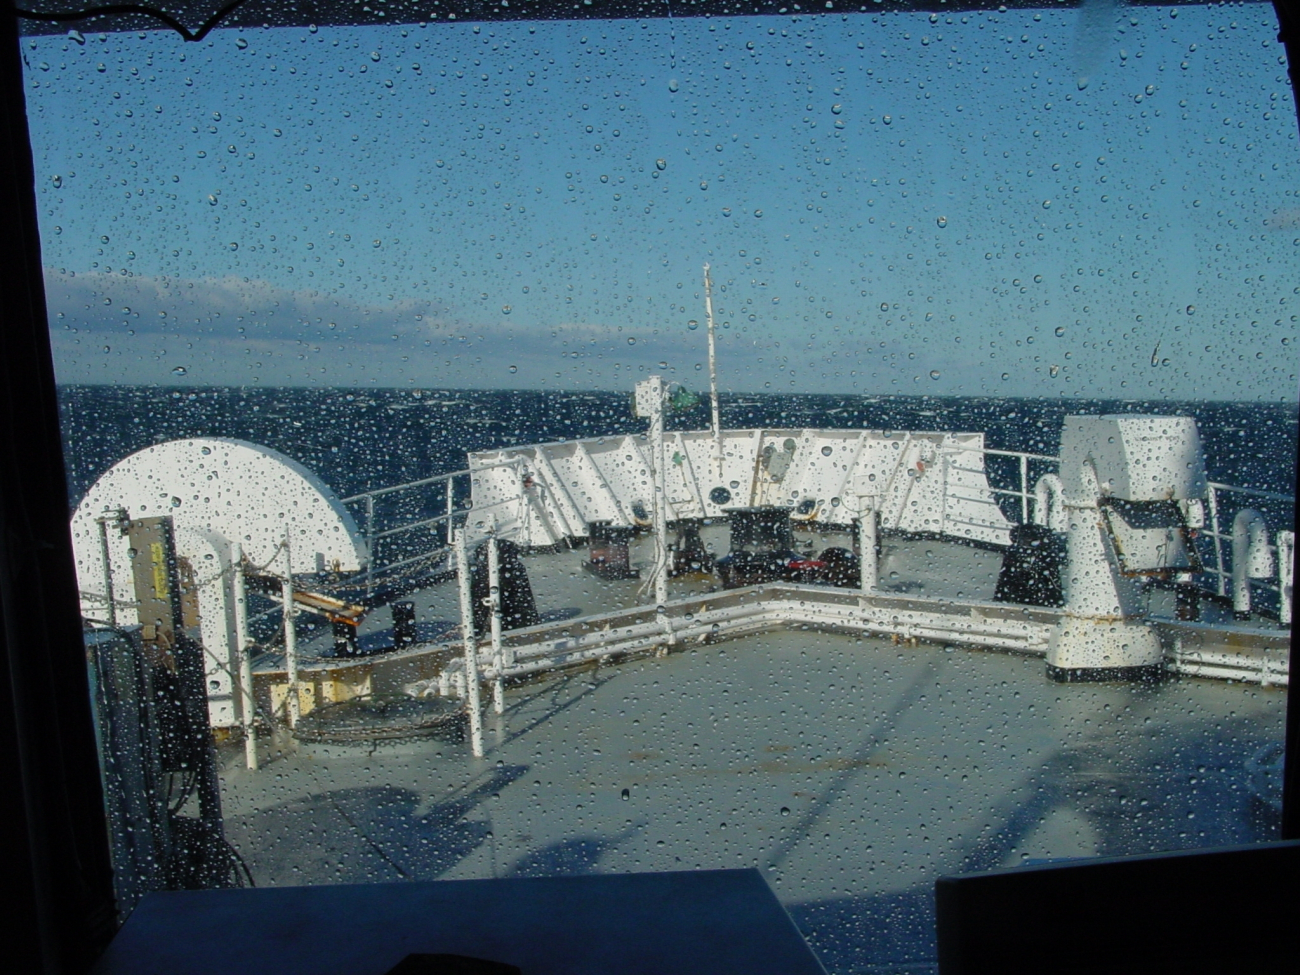 Spray on a boisterous day in the Gulf of Maine on the NOAA Ship DELAWARE II